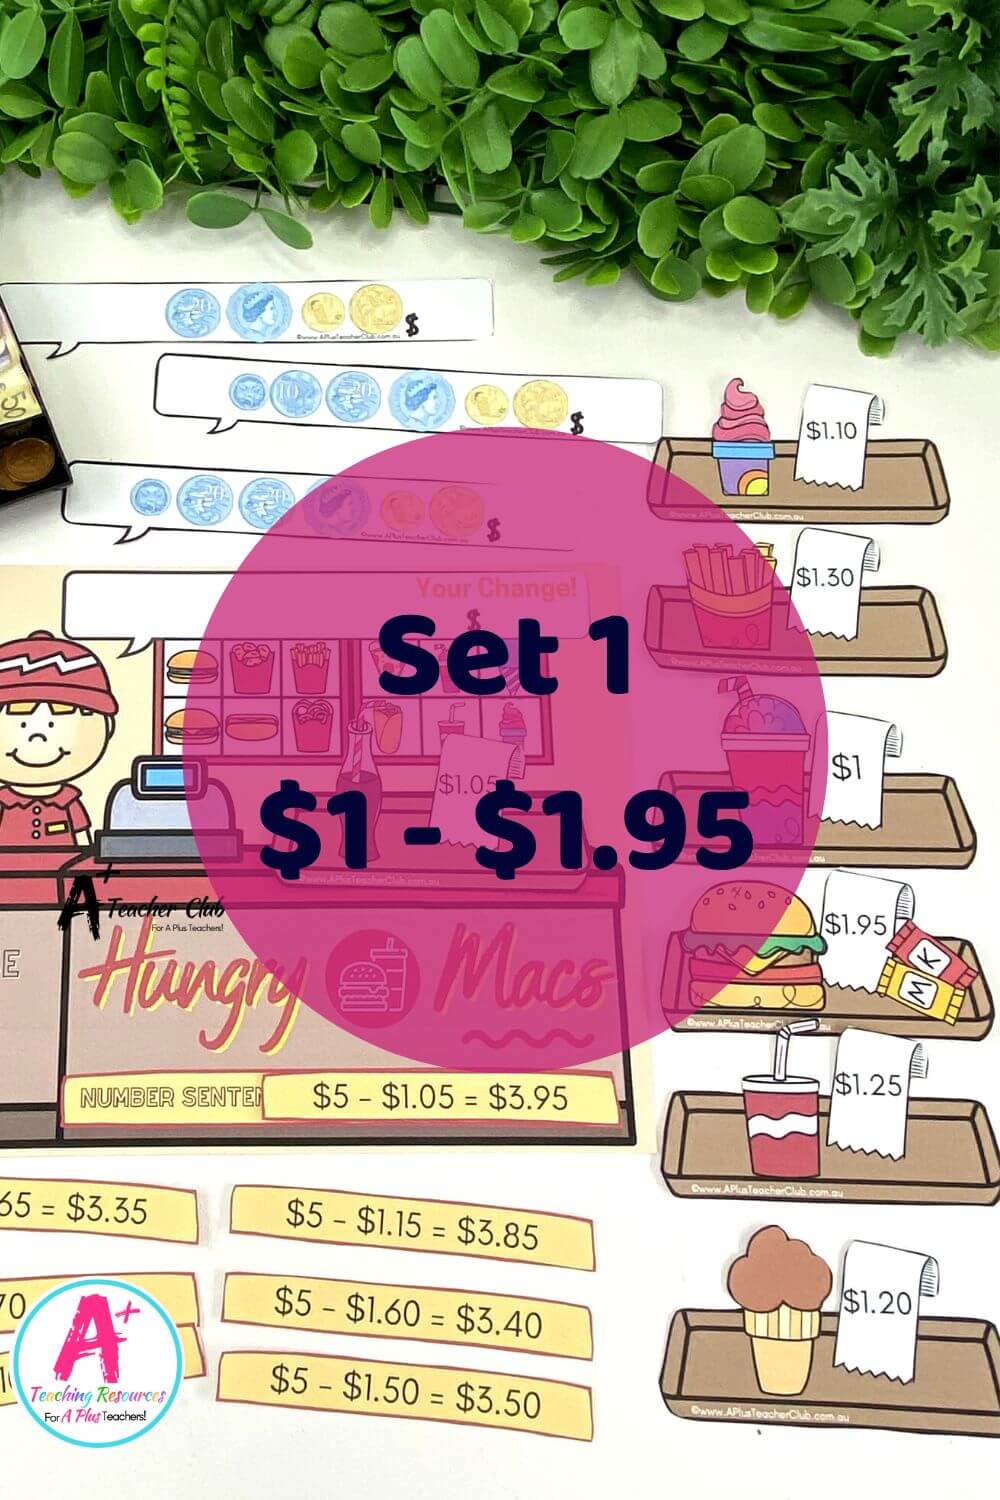 Counting Change Games - Fast Food Set 1 ($1-$1.95)